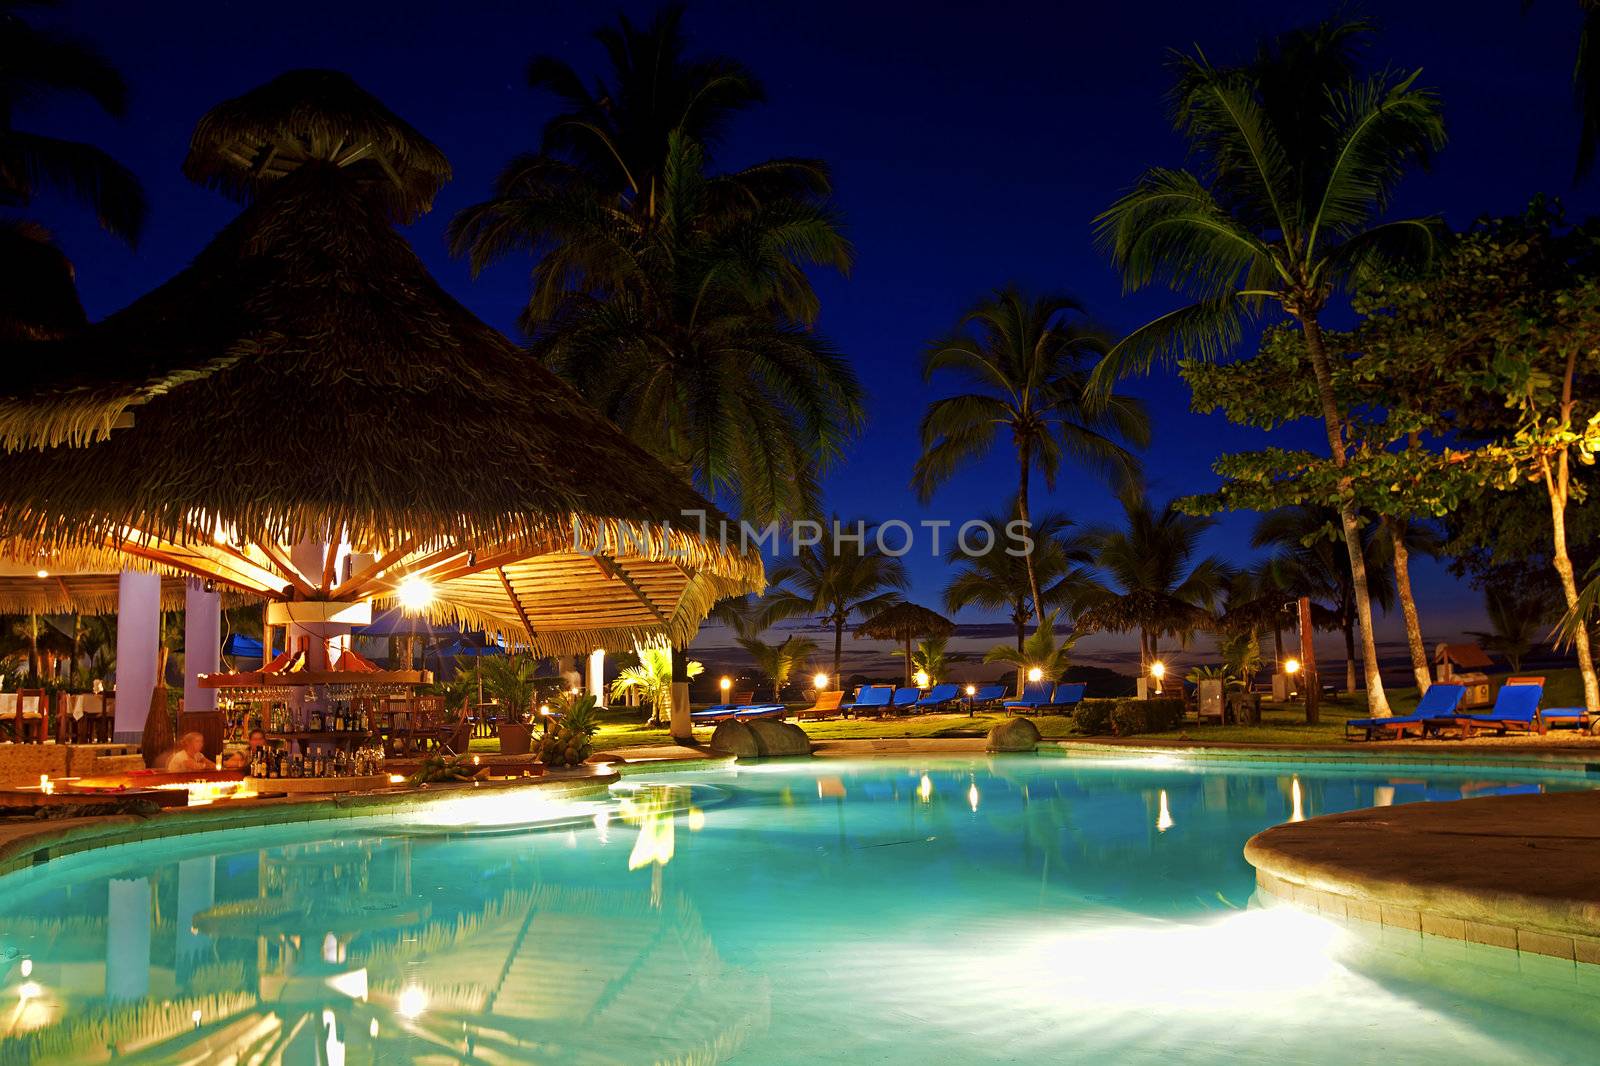 Evening picture of the swimming pool area on a resort